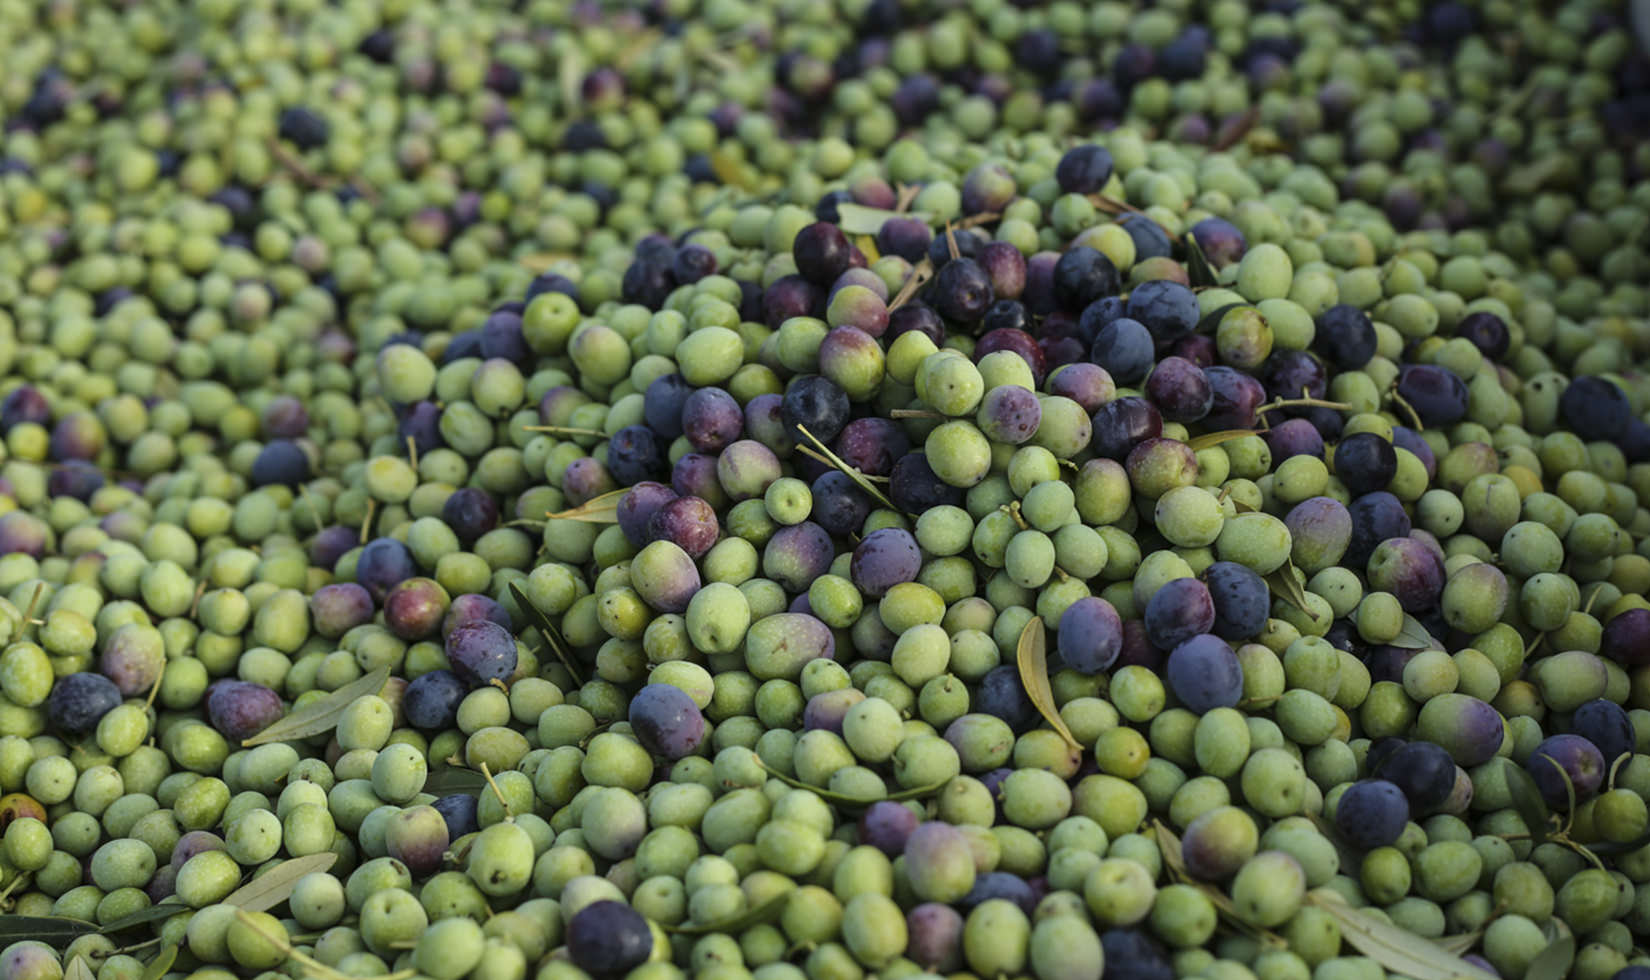 Close-up image of green and purple olives in a bin